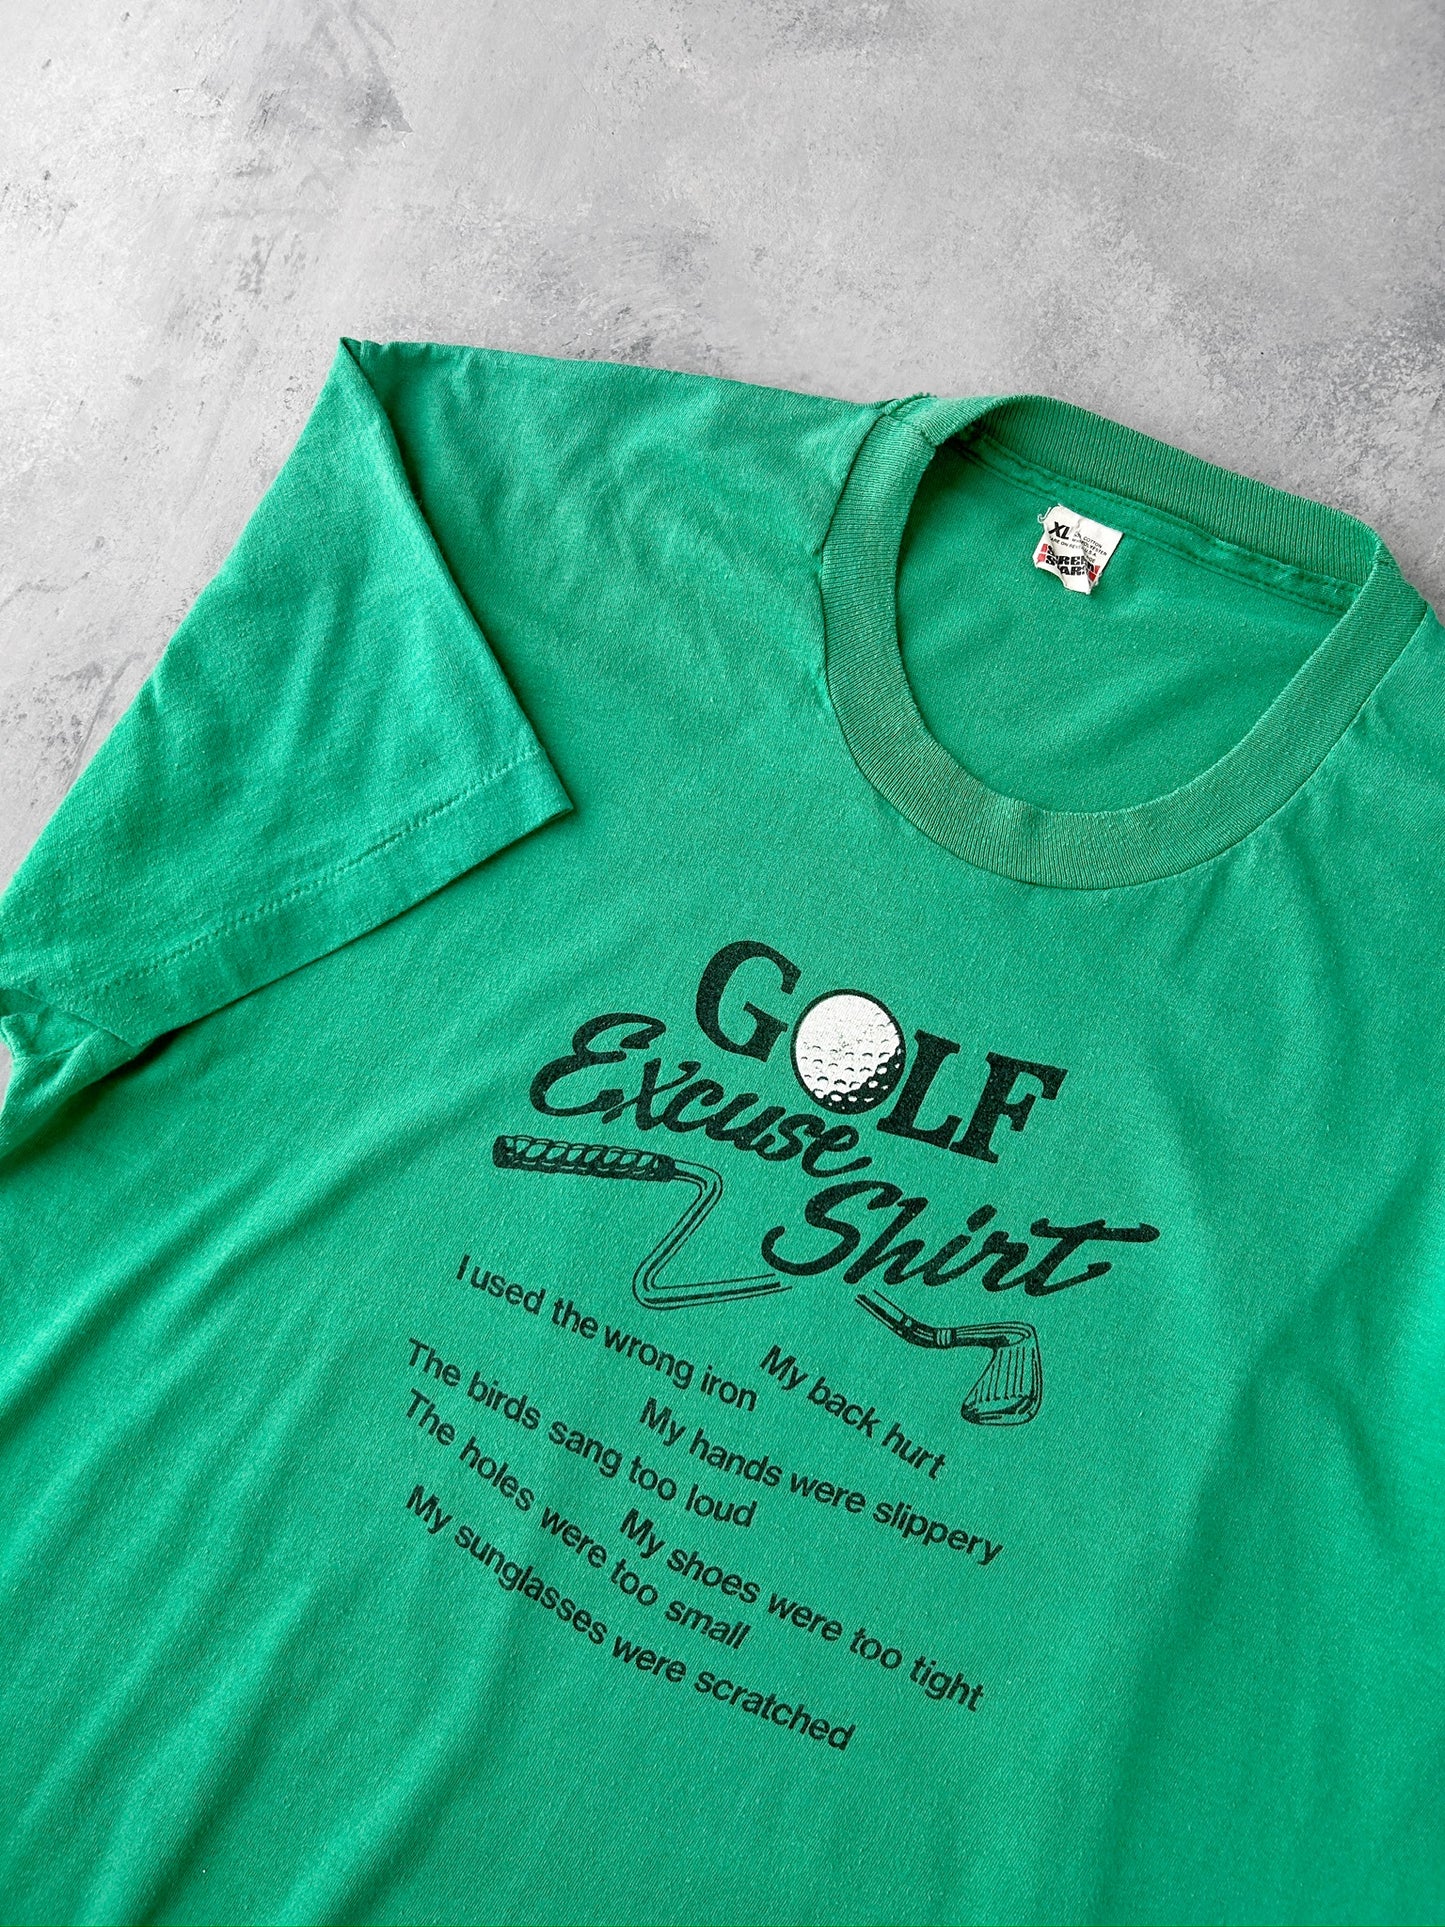 Golf Excuse T-Shirt 80's - Large